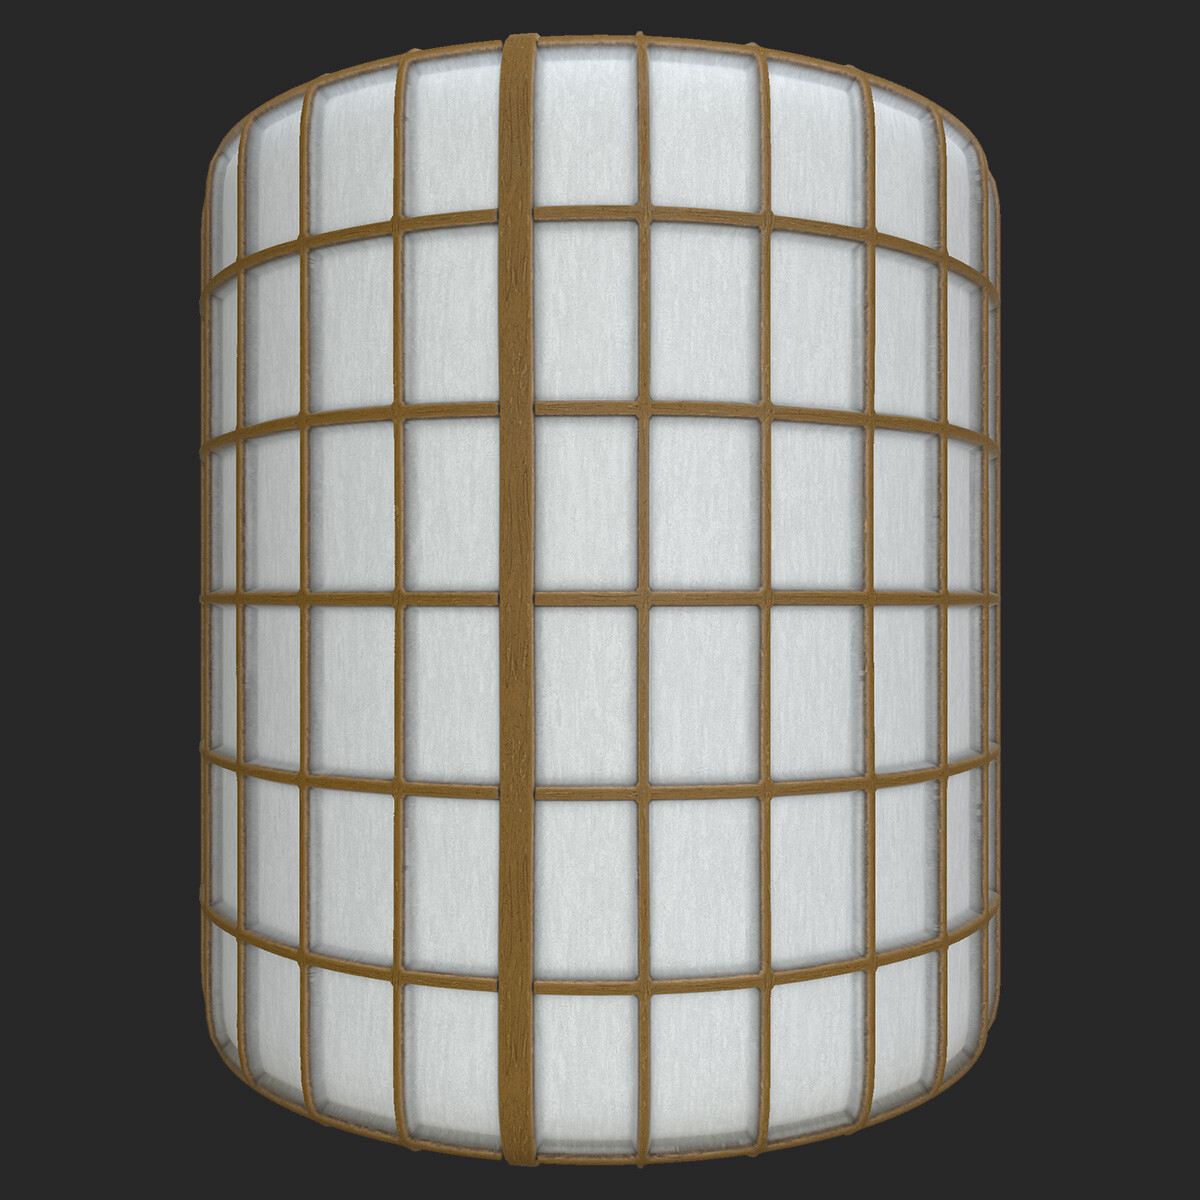 Japanese Shoji Screen Paper Texture for Doors and Dividers, Free PBR